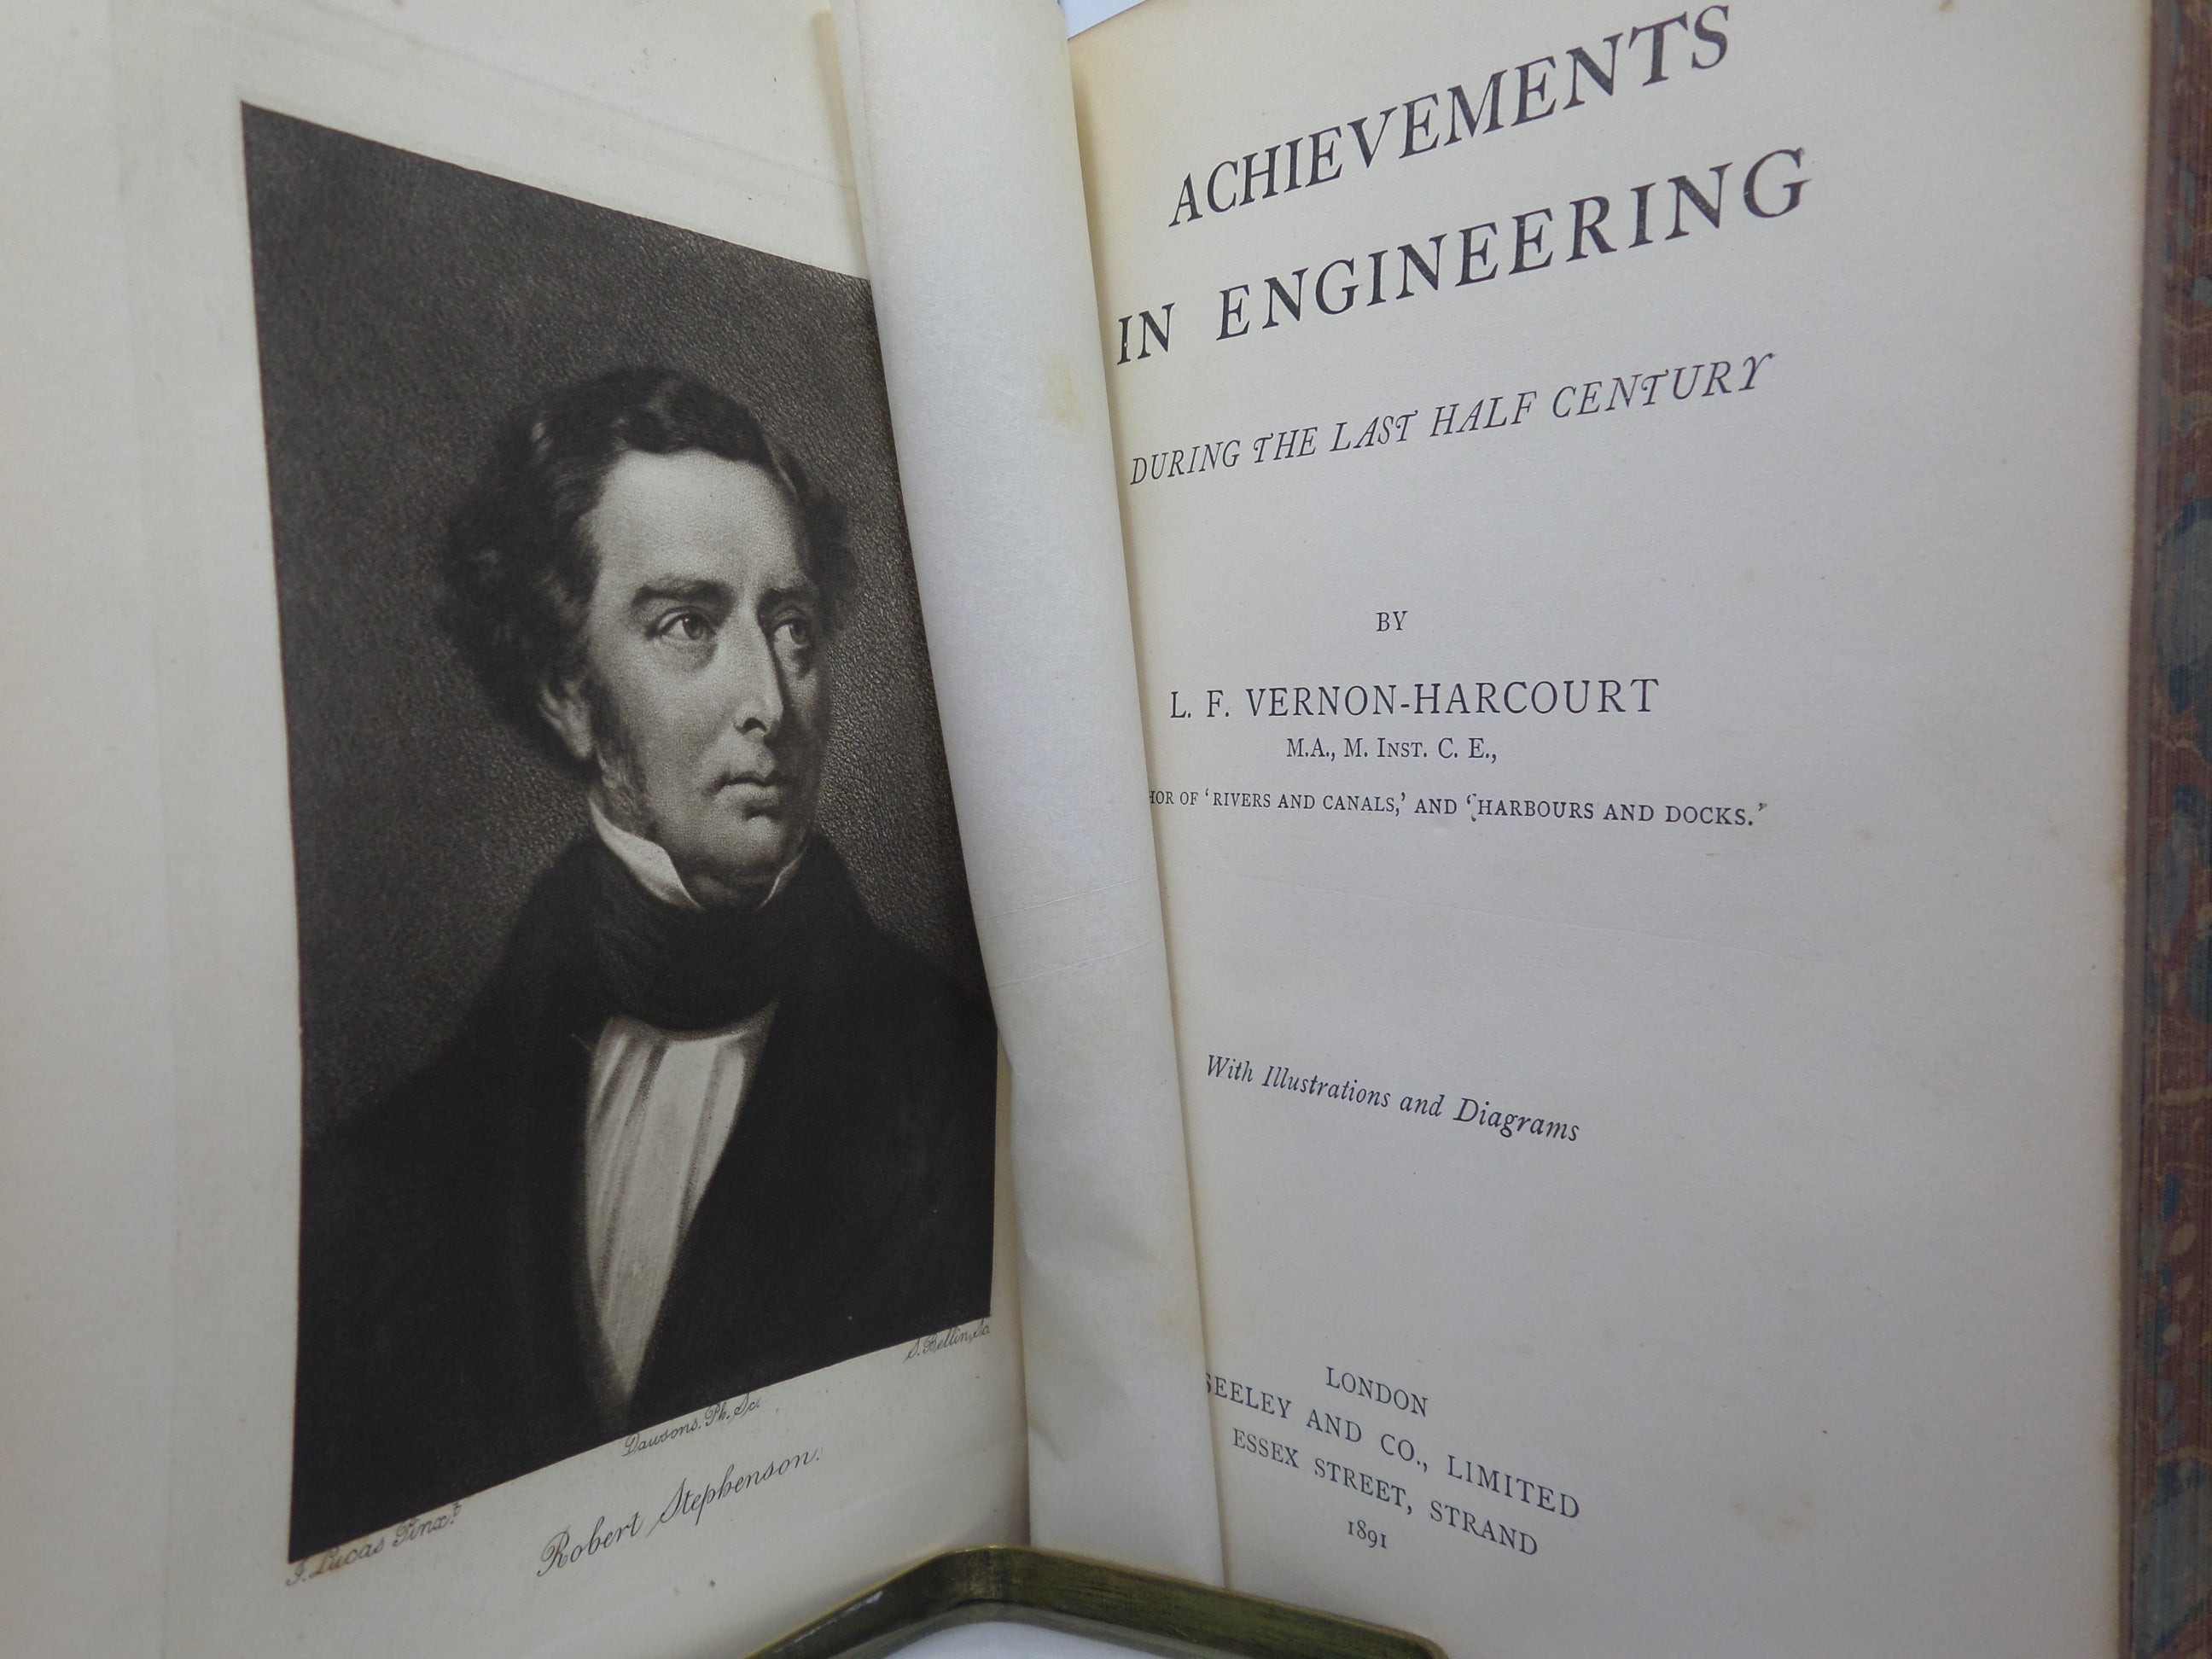 ACHIEVEMENTS IN ENGINEERING BY L. F. VERNON-HARCOURT 1891 LEATHER-BOUND